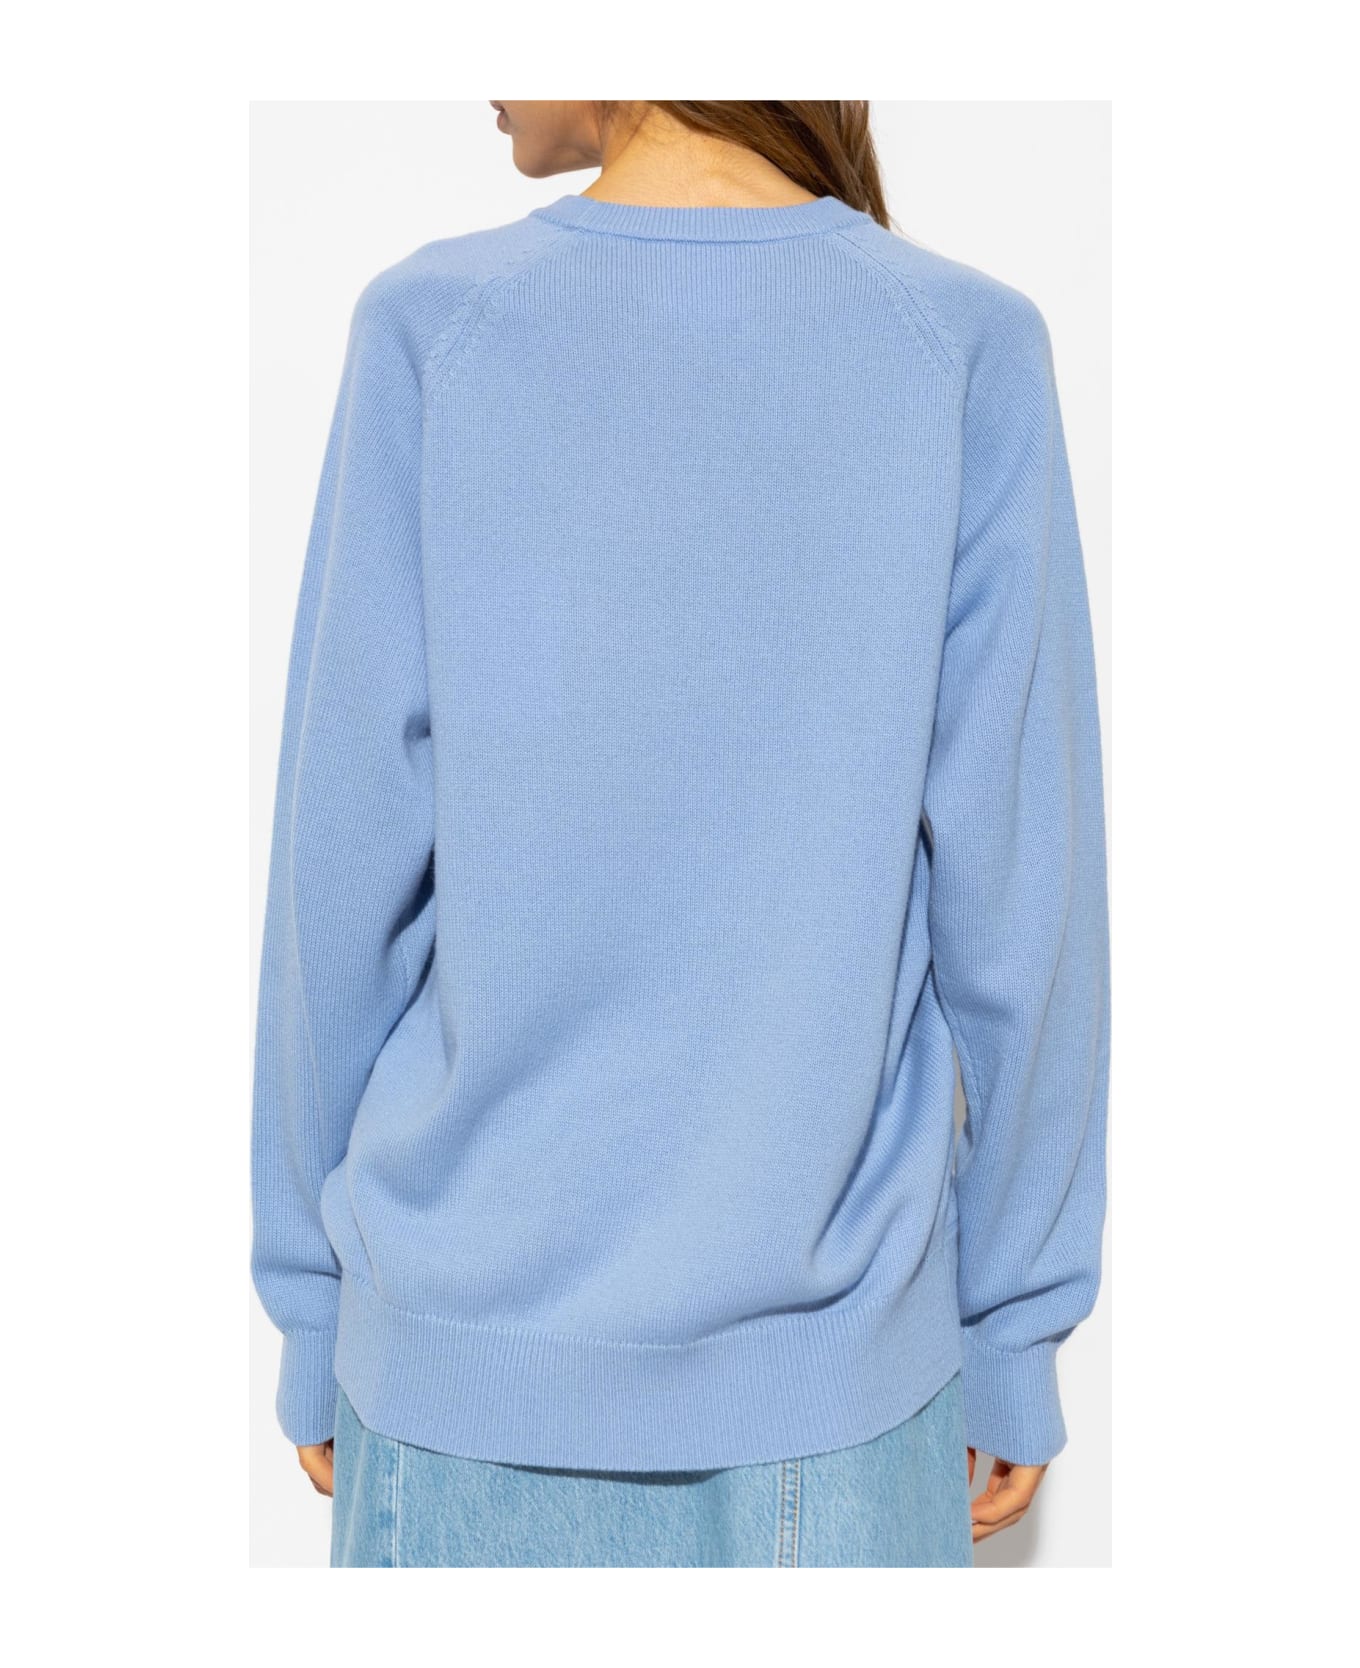 Givenchy Cashmere Sweater - Blue